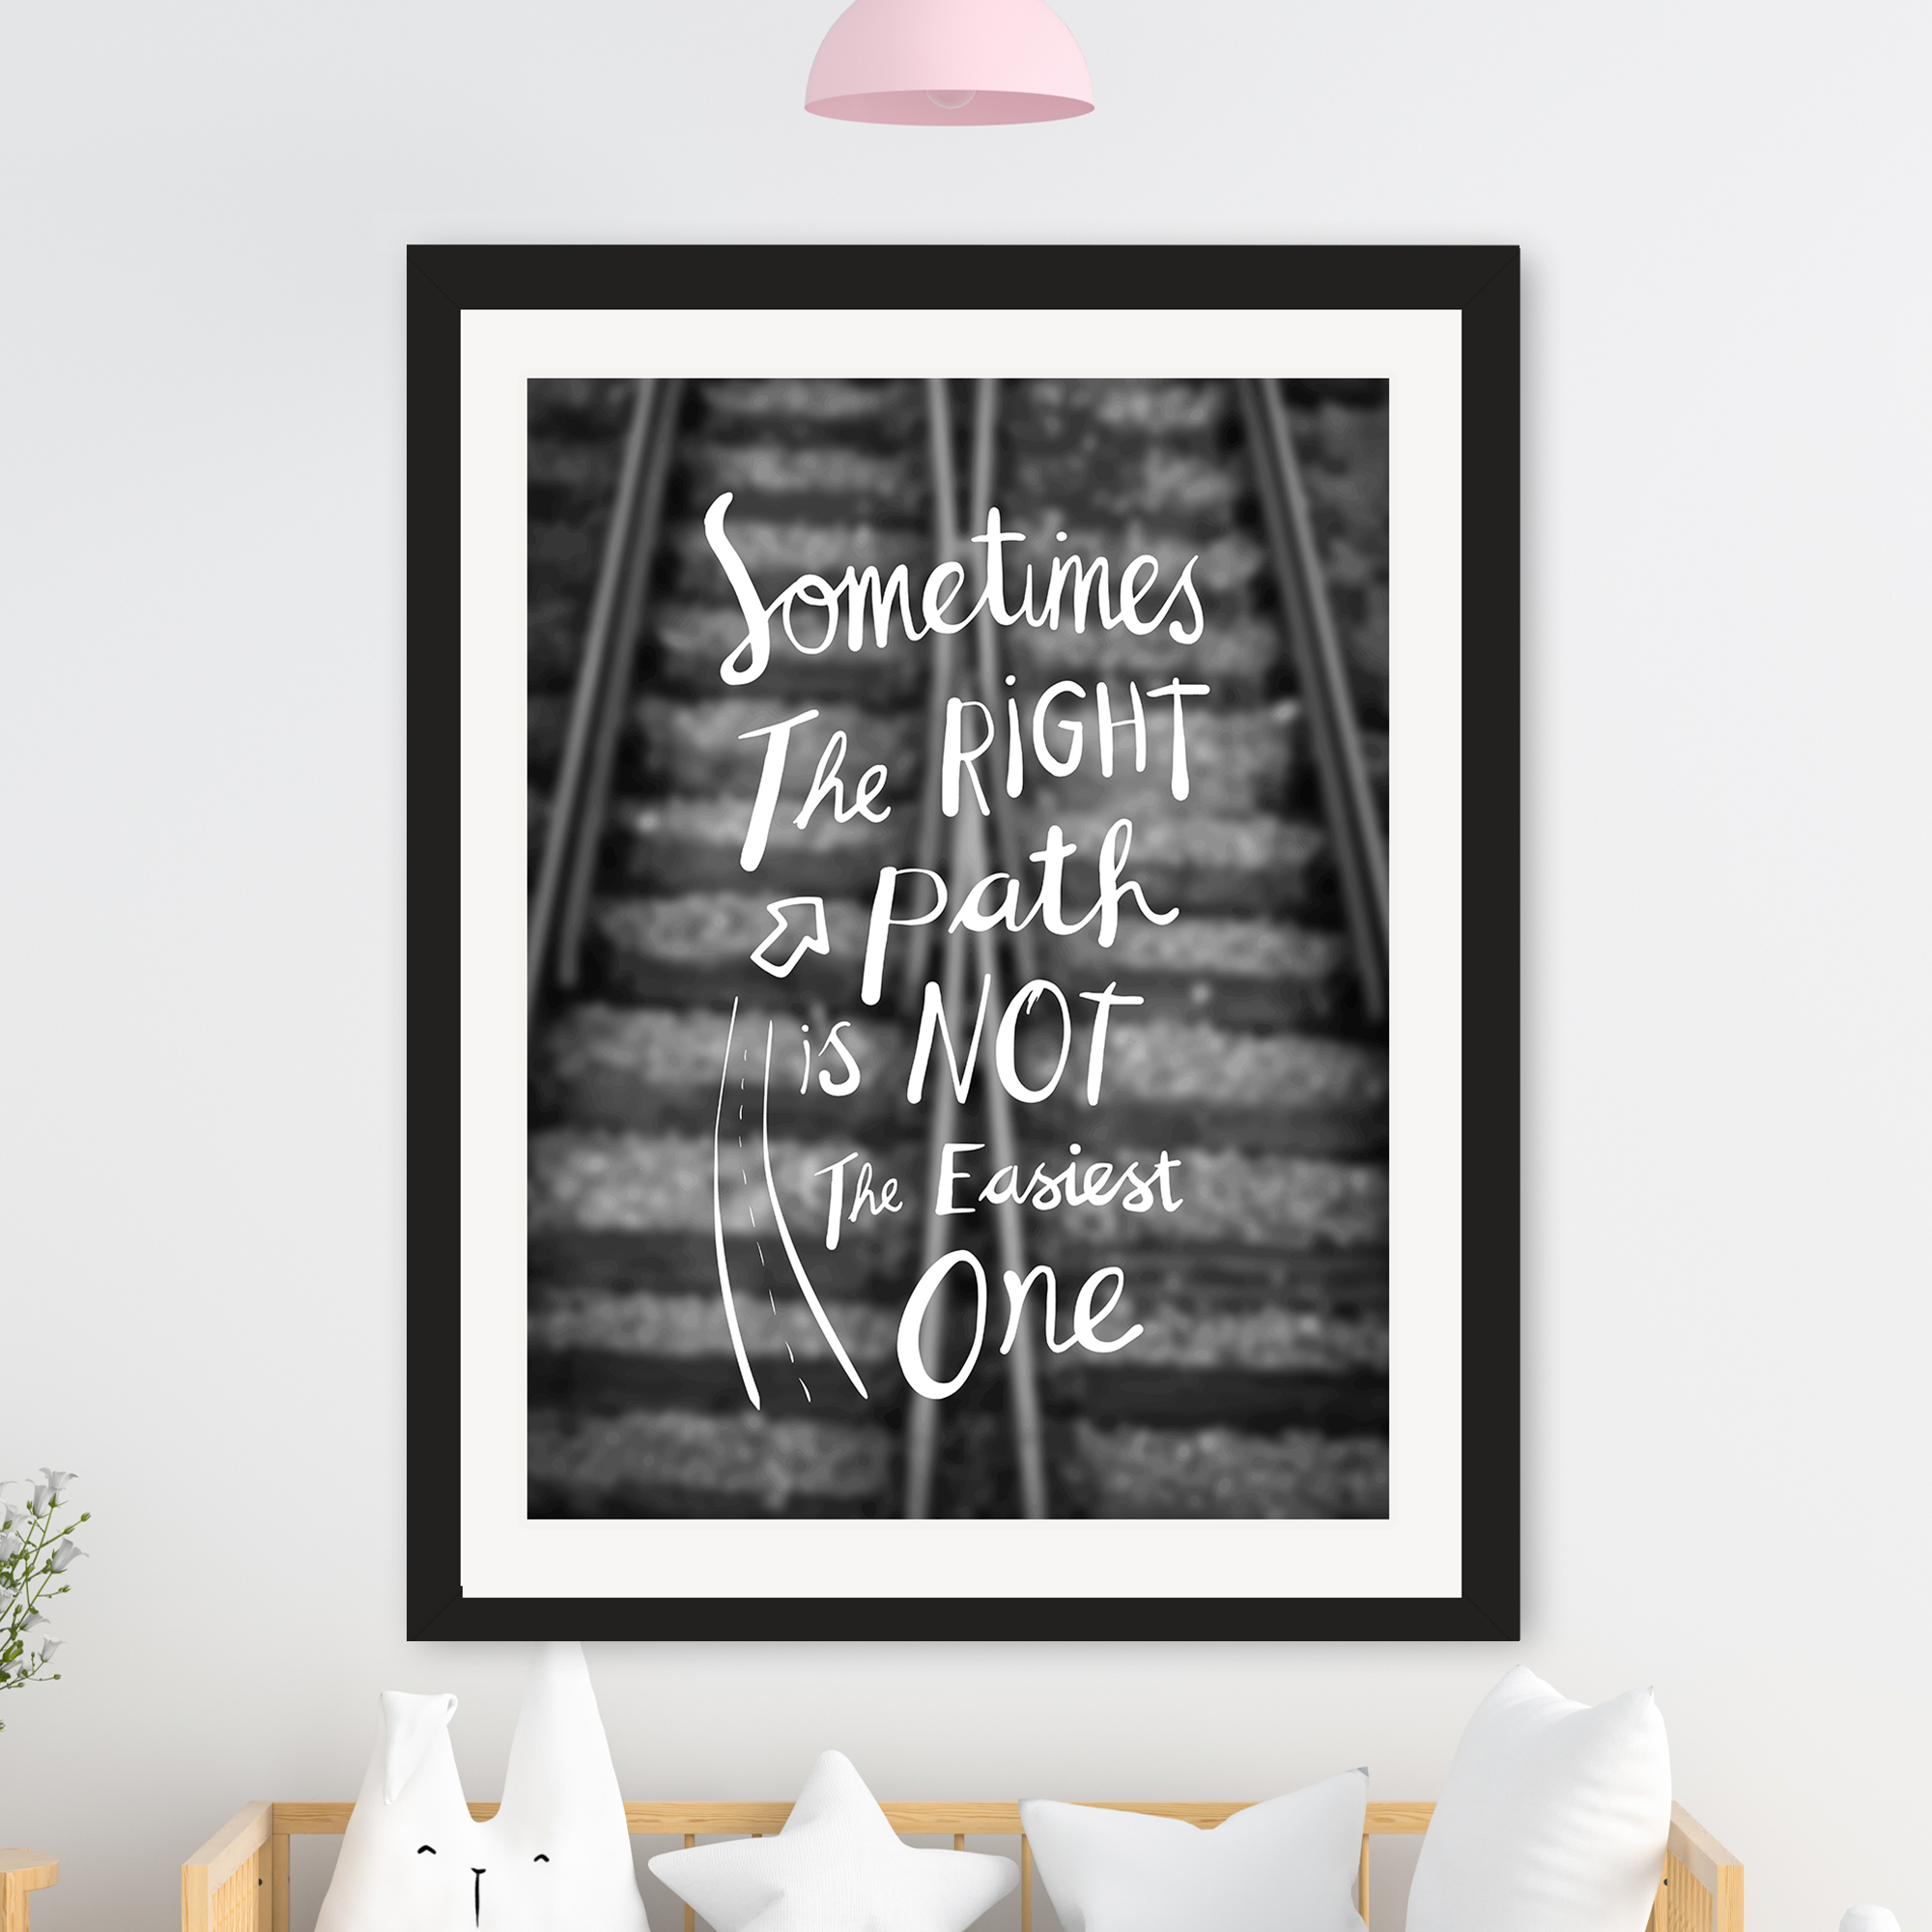 Sometimes The Right Path Is Not The Easiest One Poster